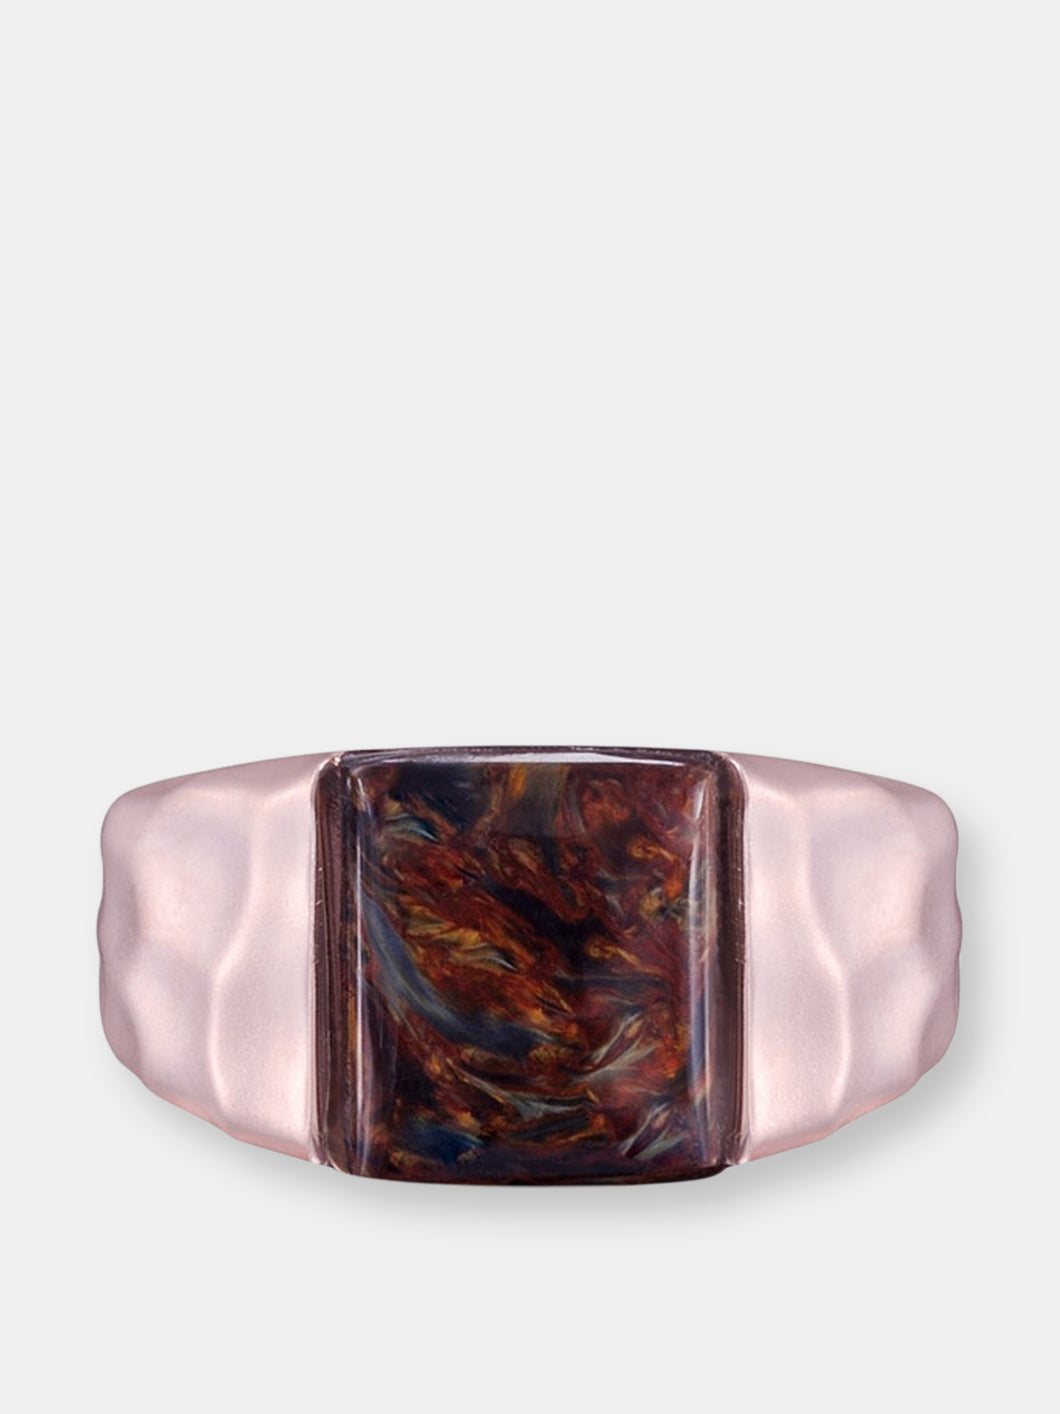 Red Pietersite Stone Signet Ring in 14K Rose Gold Plated Sterling Silver